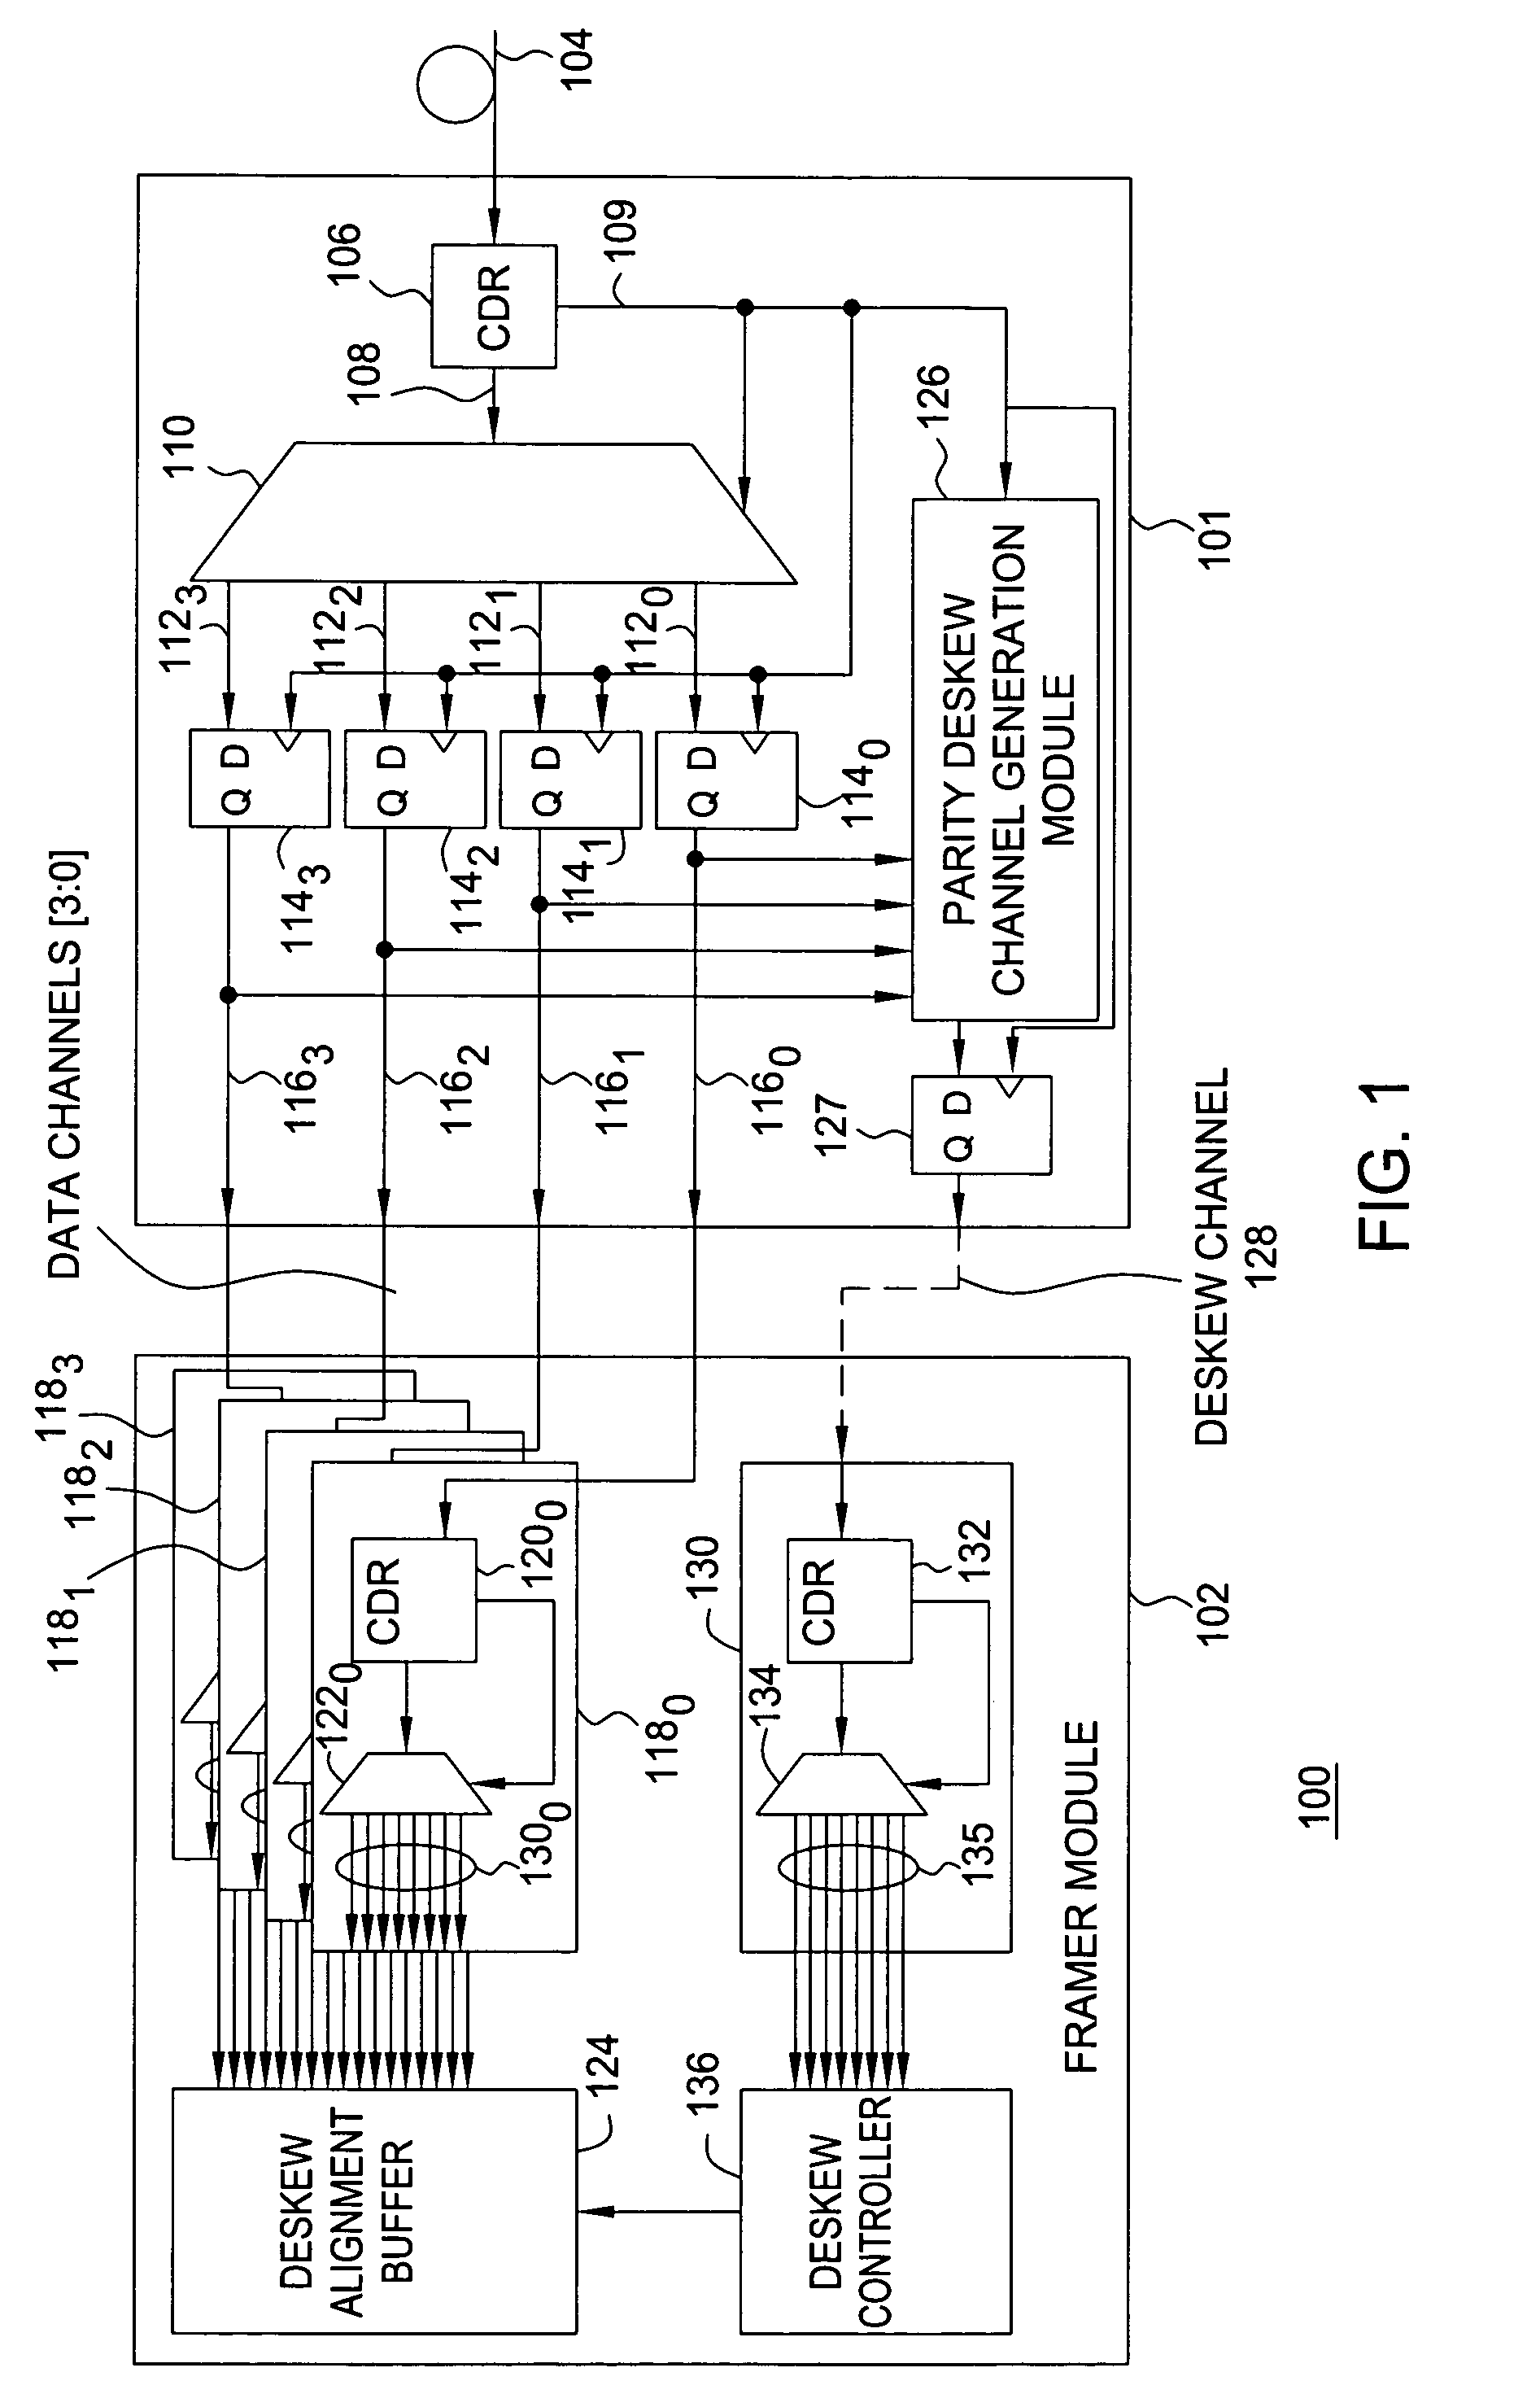 Method and apparatus for synchronizing data channels using an alternating parity deskew channel